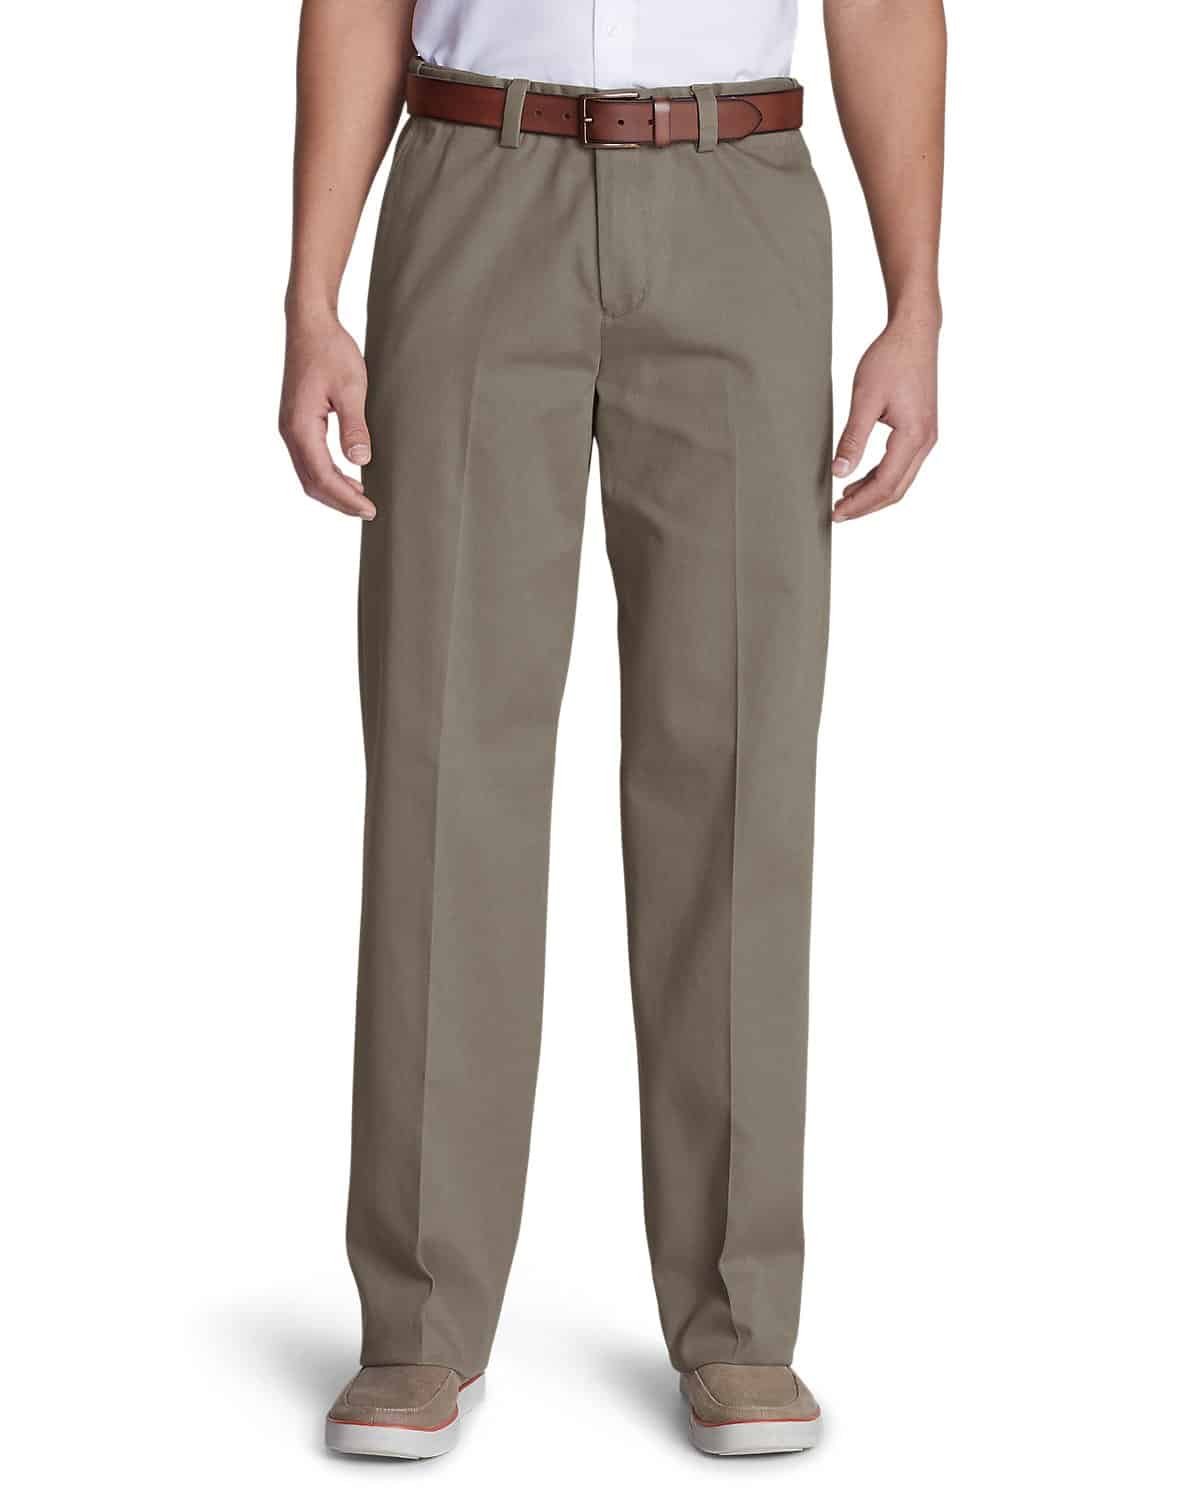 14 Most Comfortable Men's Business Casual Pants and Chinos Comfort Nerd